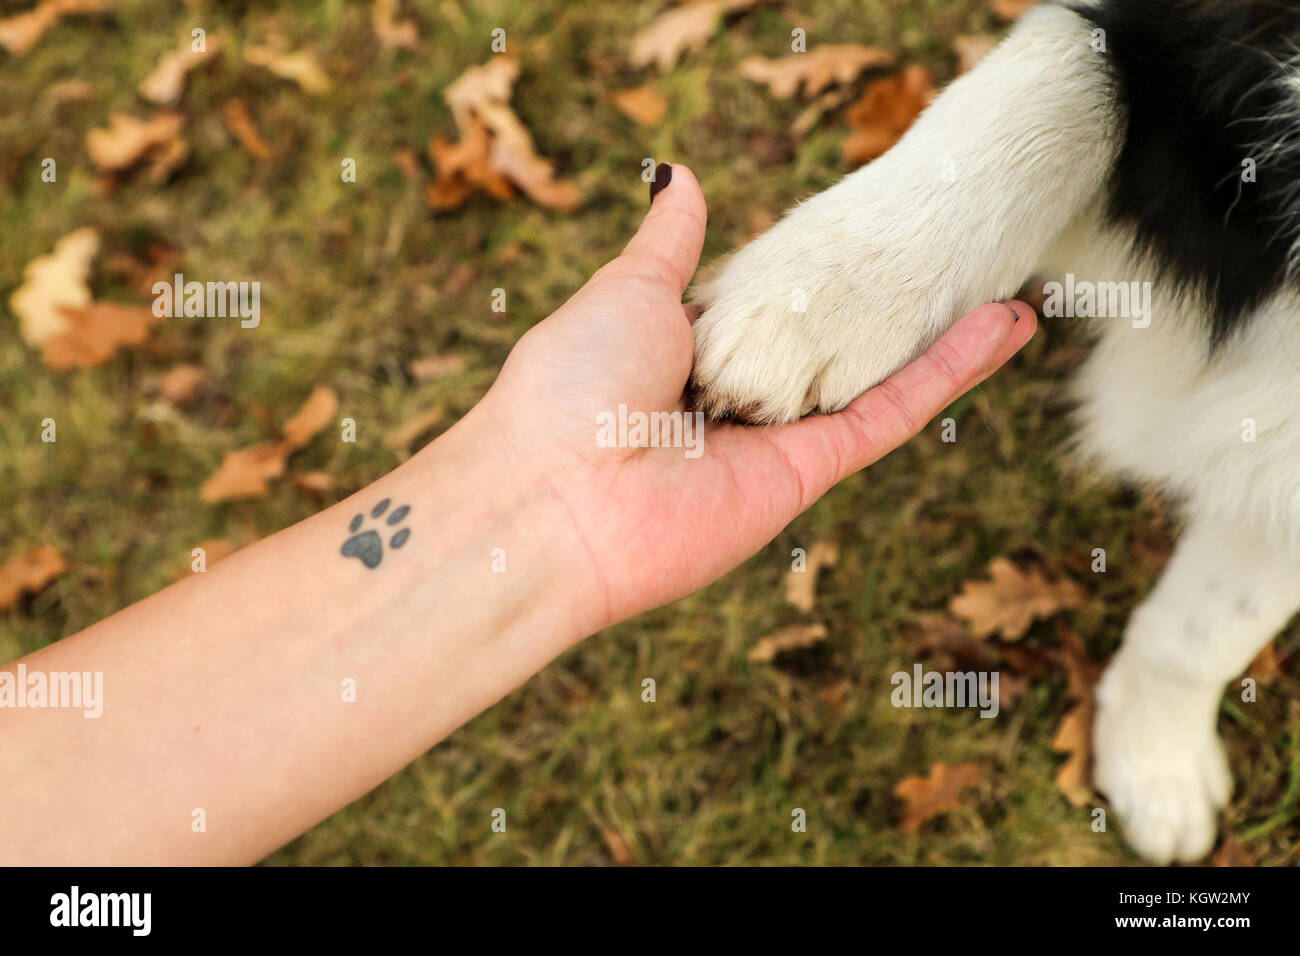 30 Dog Paw Tattoo Ideas for Men and Women  PetPress